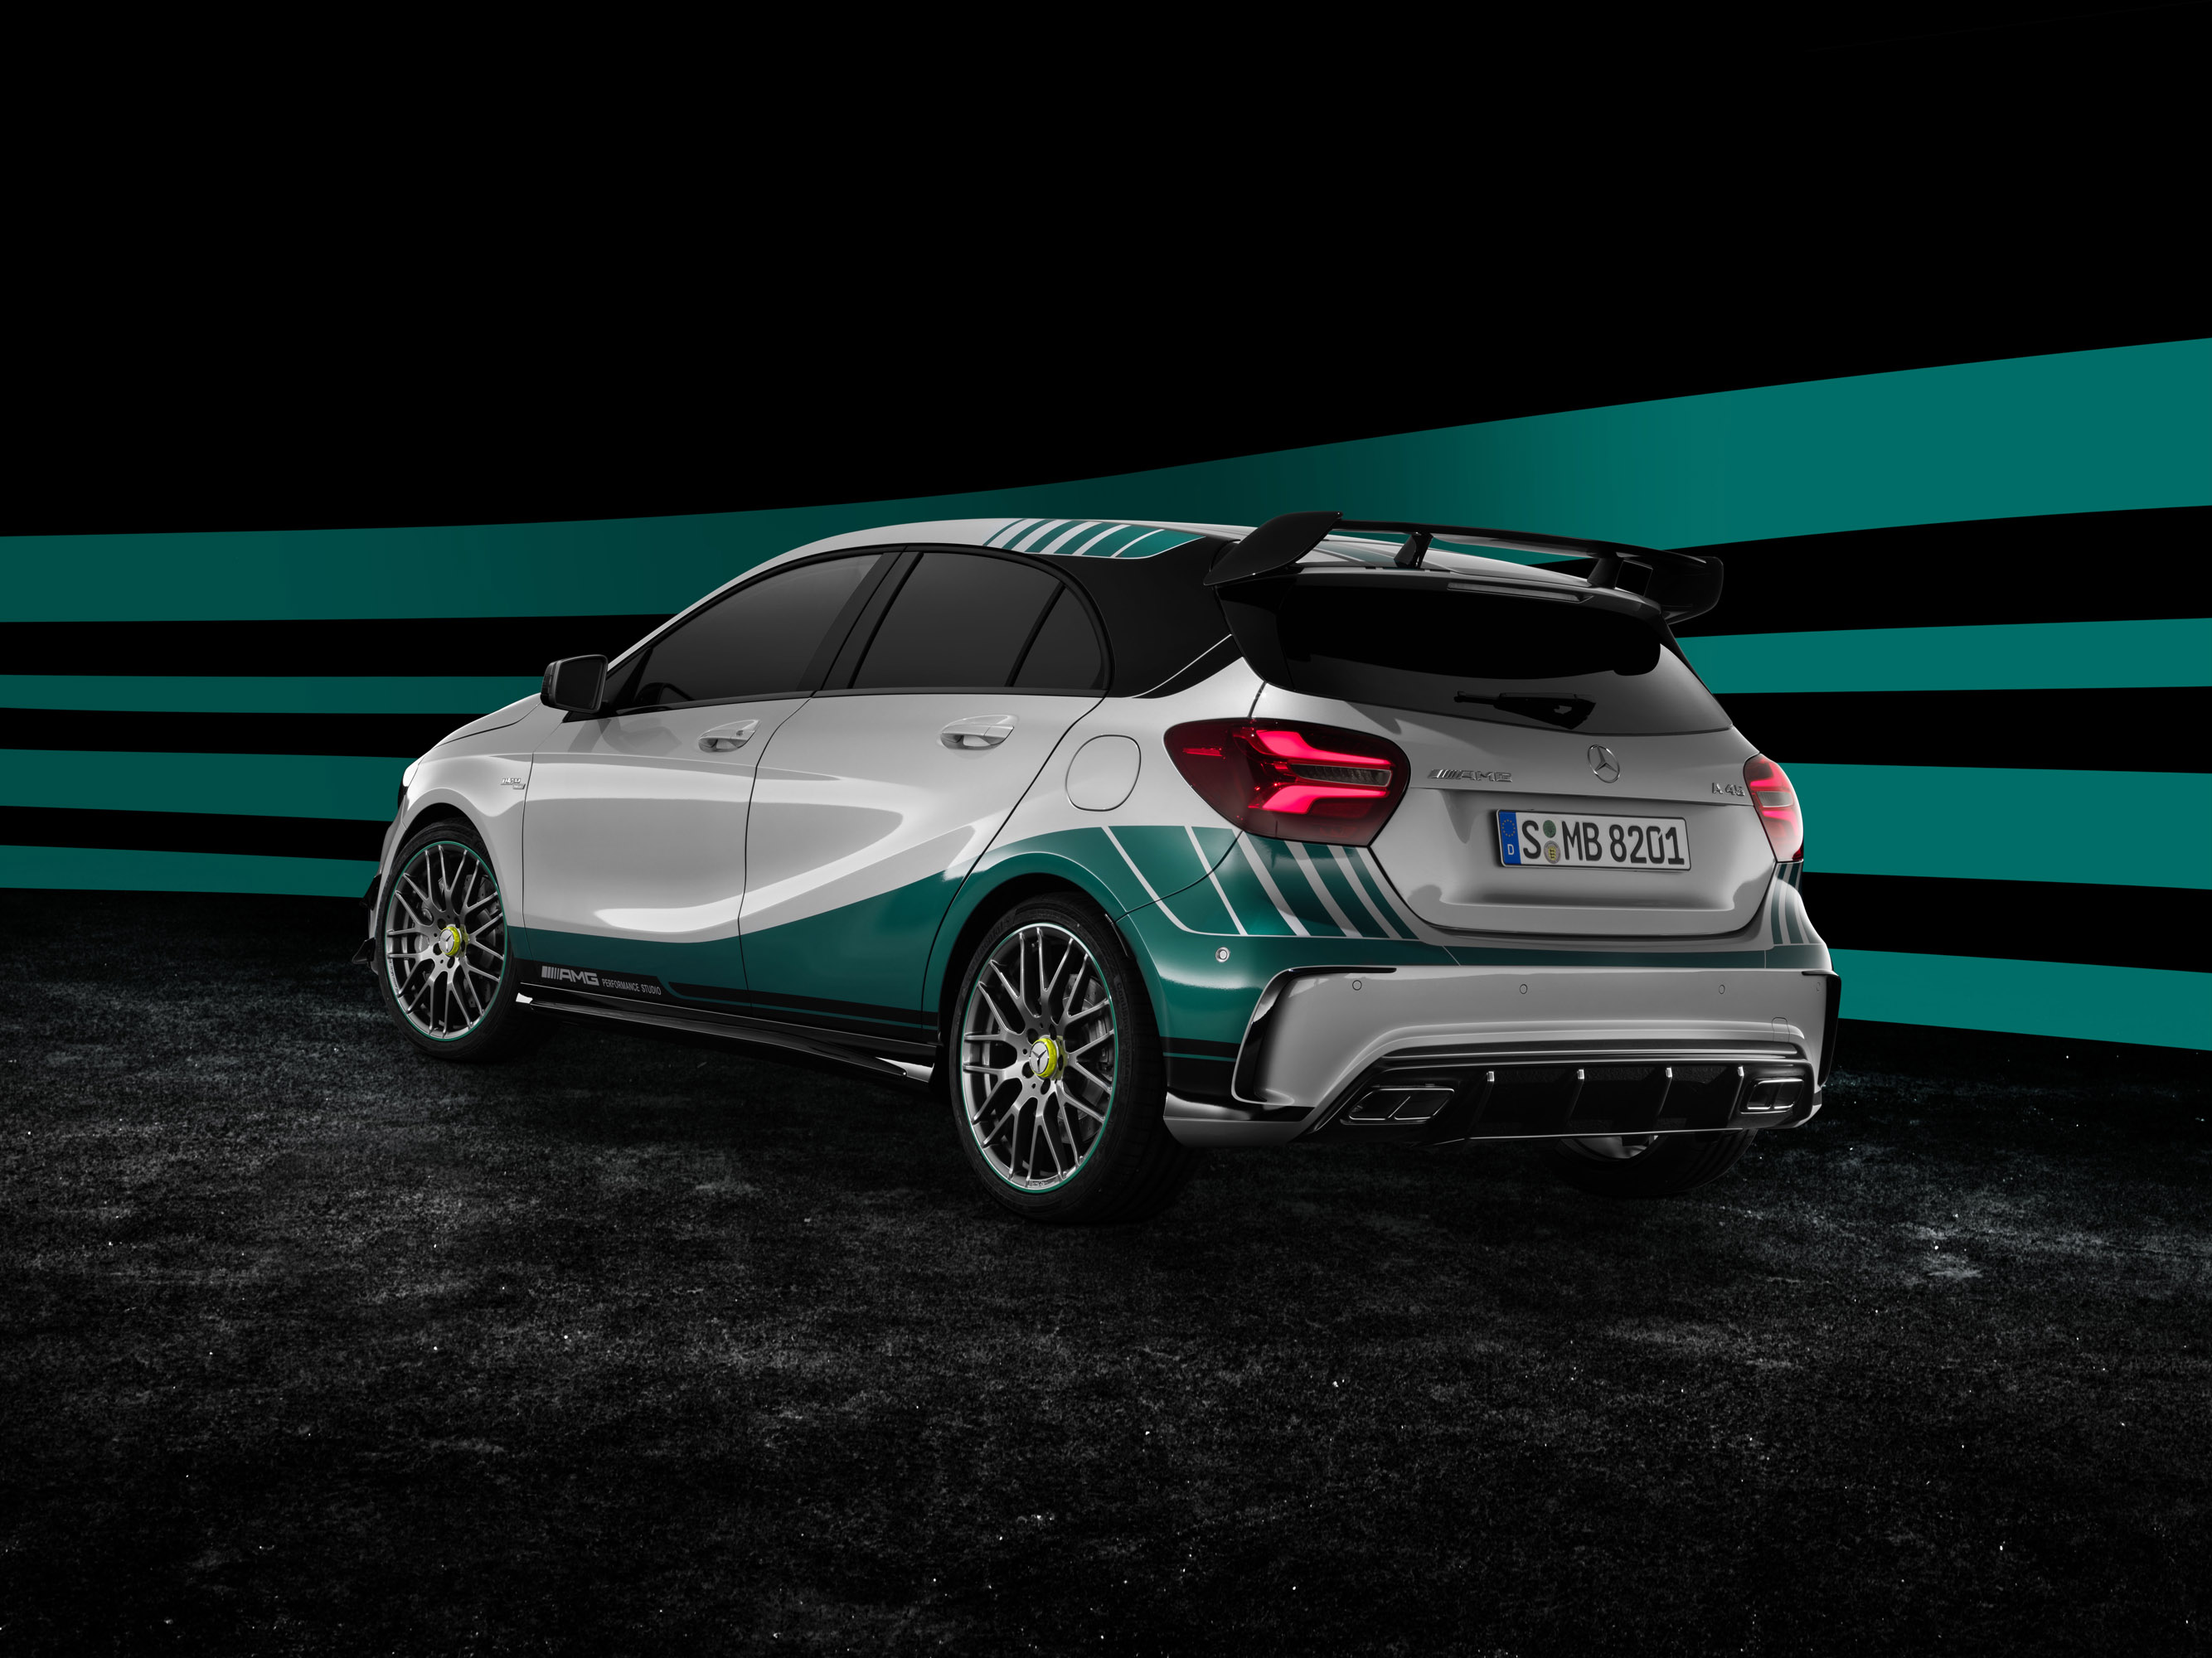 Mercedes-AMG A45 4MATIC Champions Edition